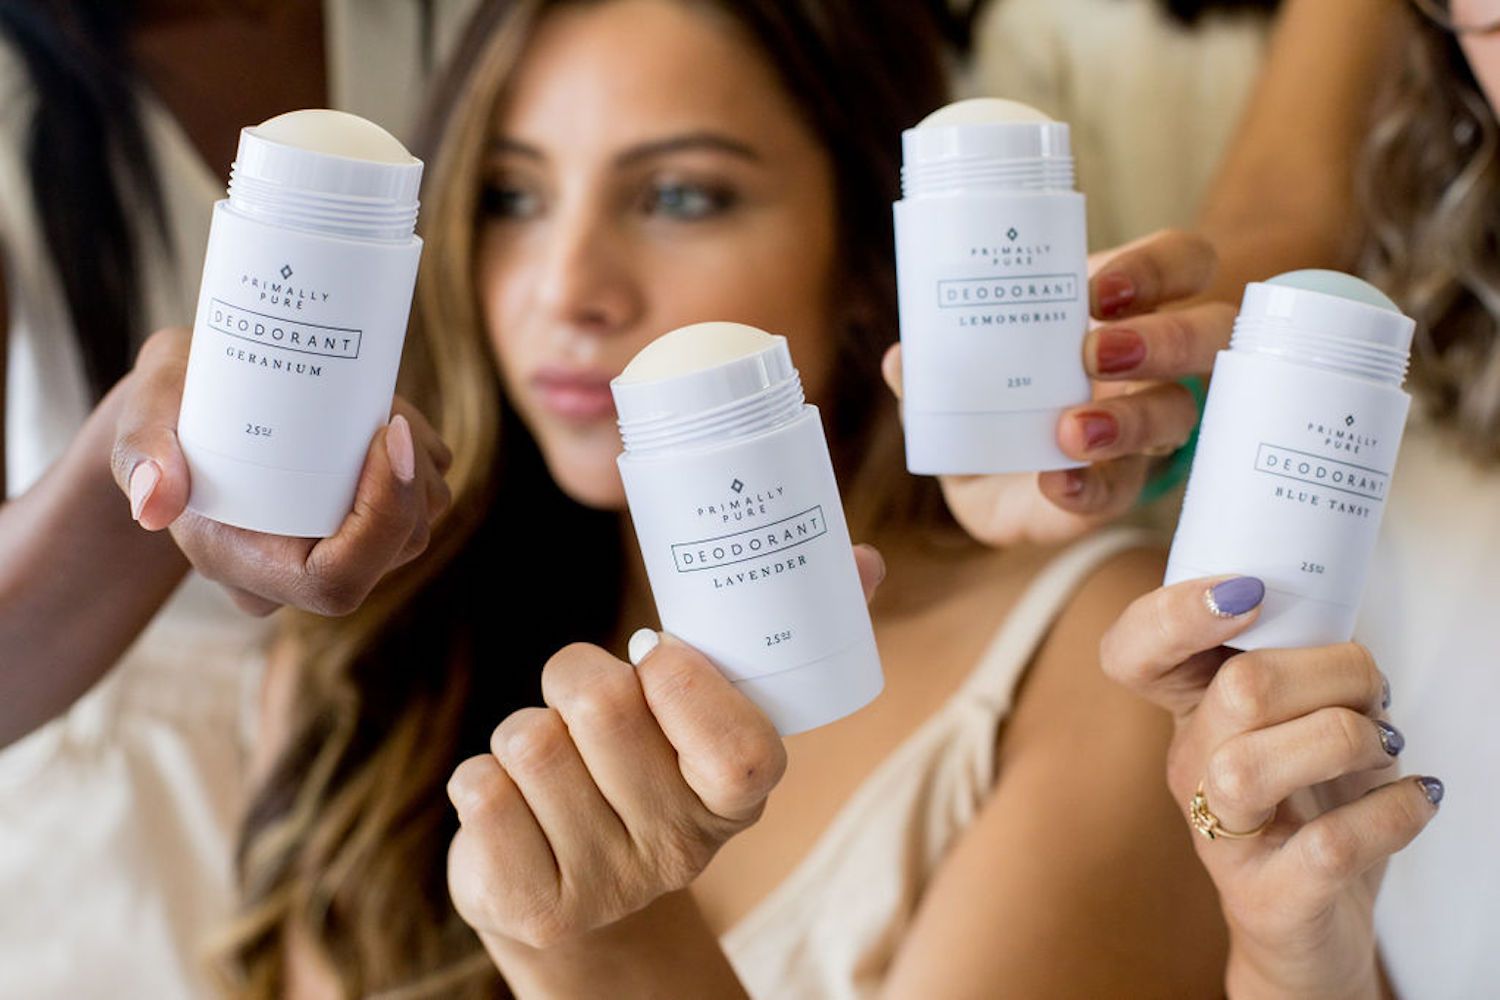 New To Natural Deodorant? Here's What You Need To Know